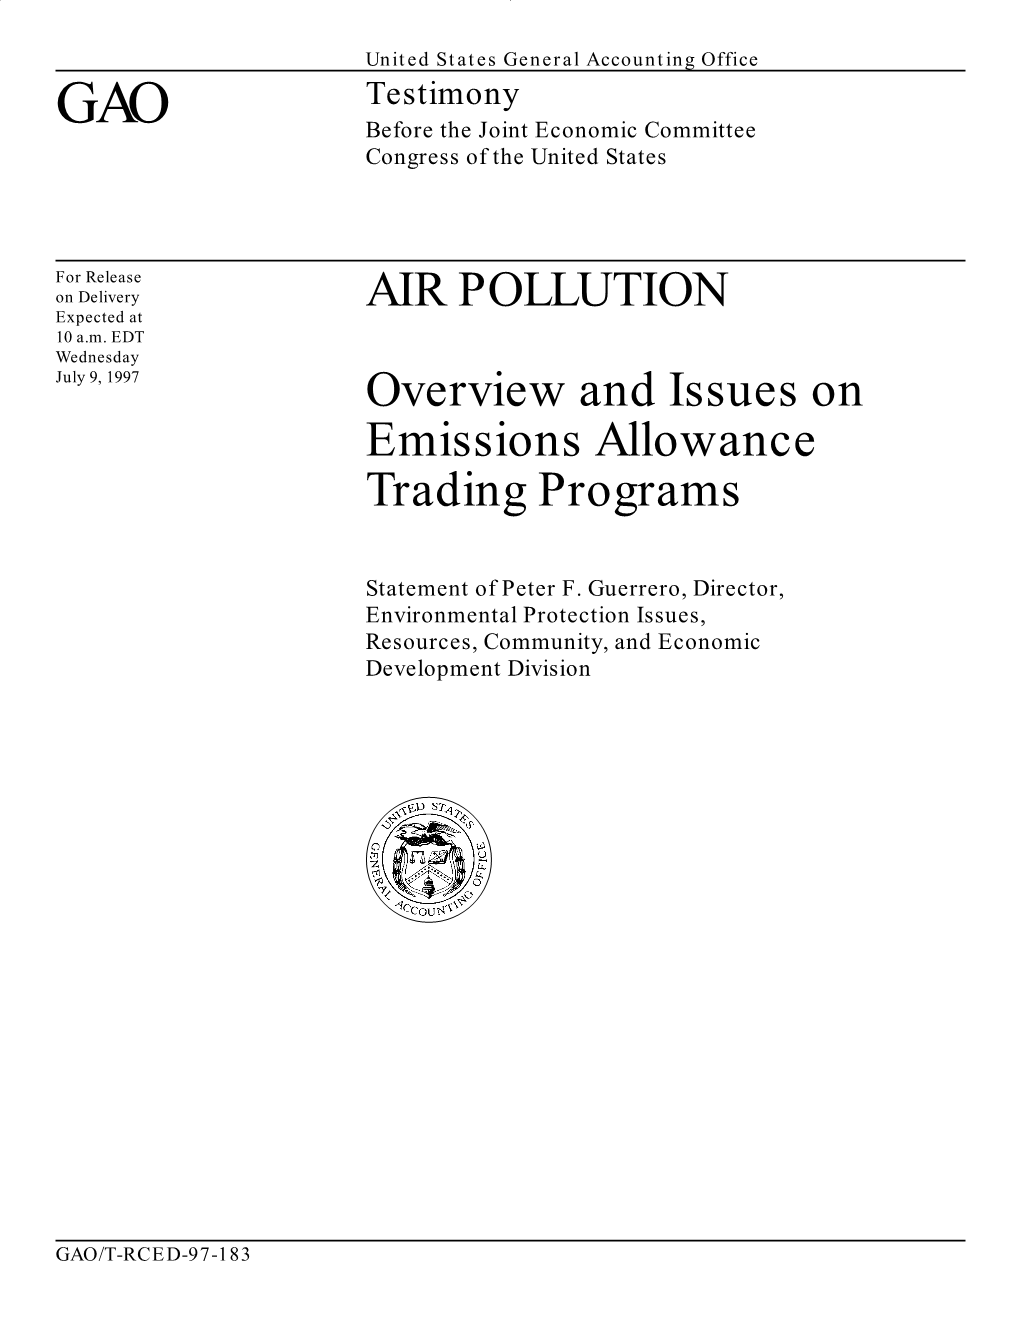 AIR POLLUTION: Overview and Issues on Emissions Allowance